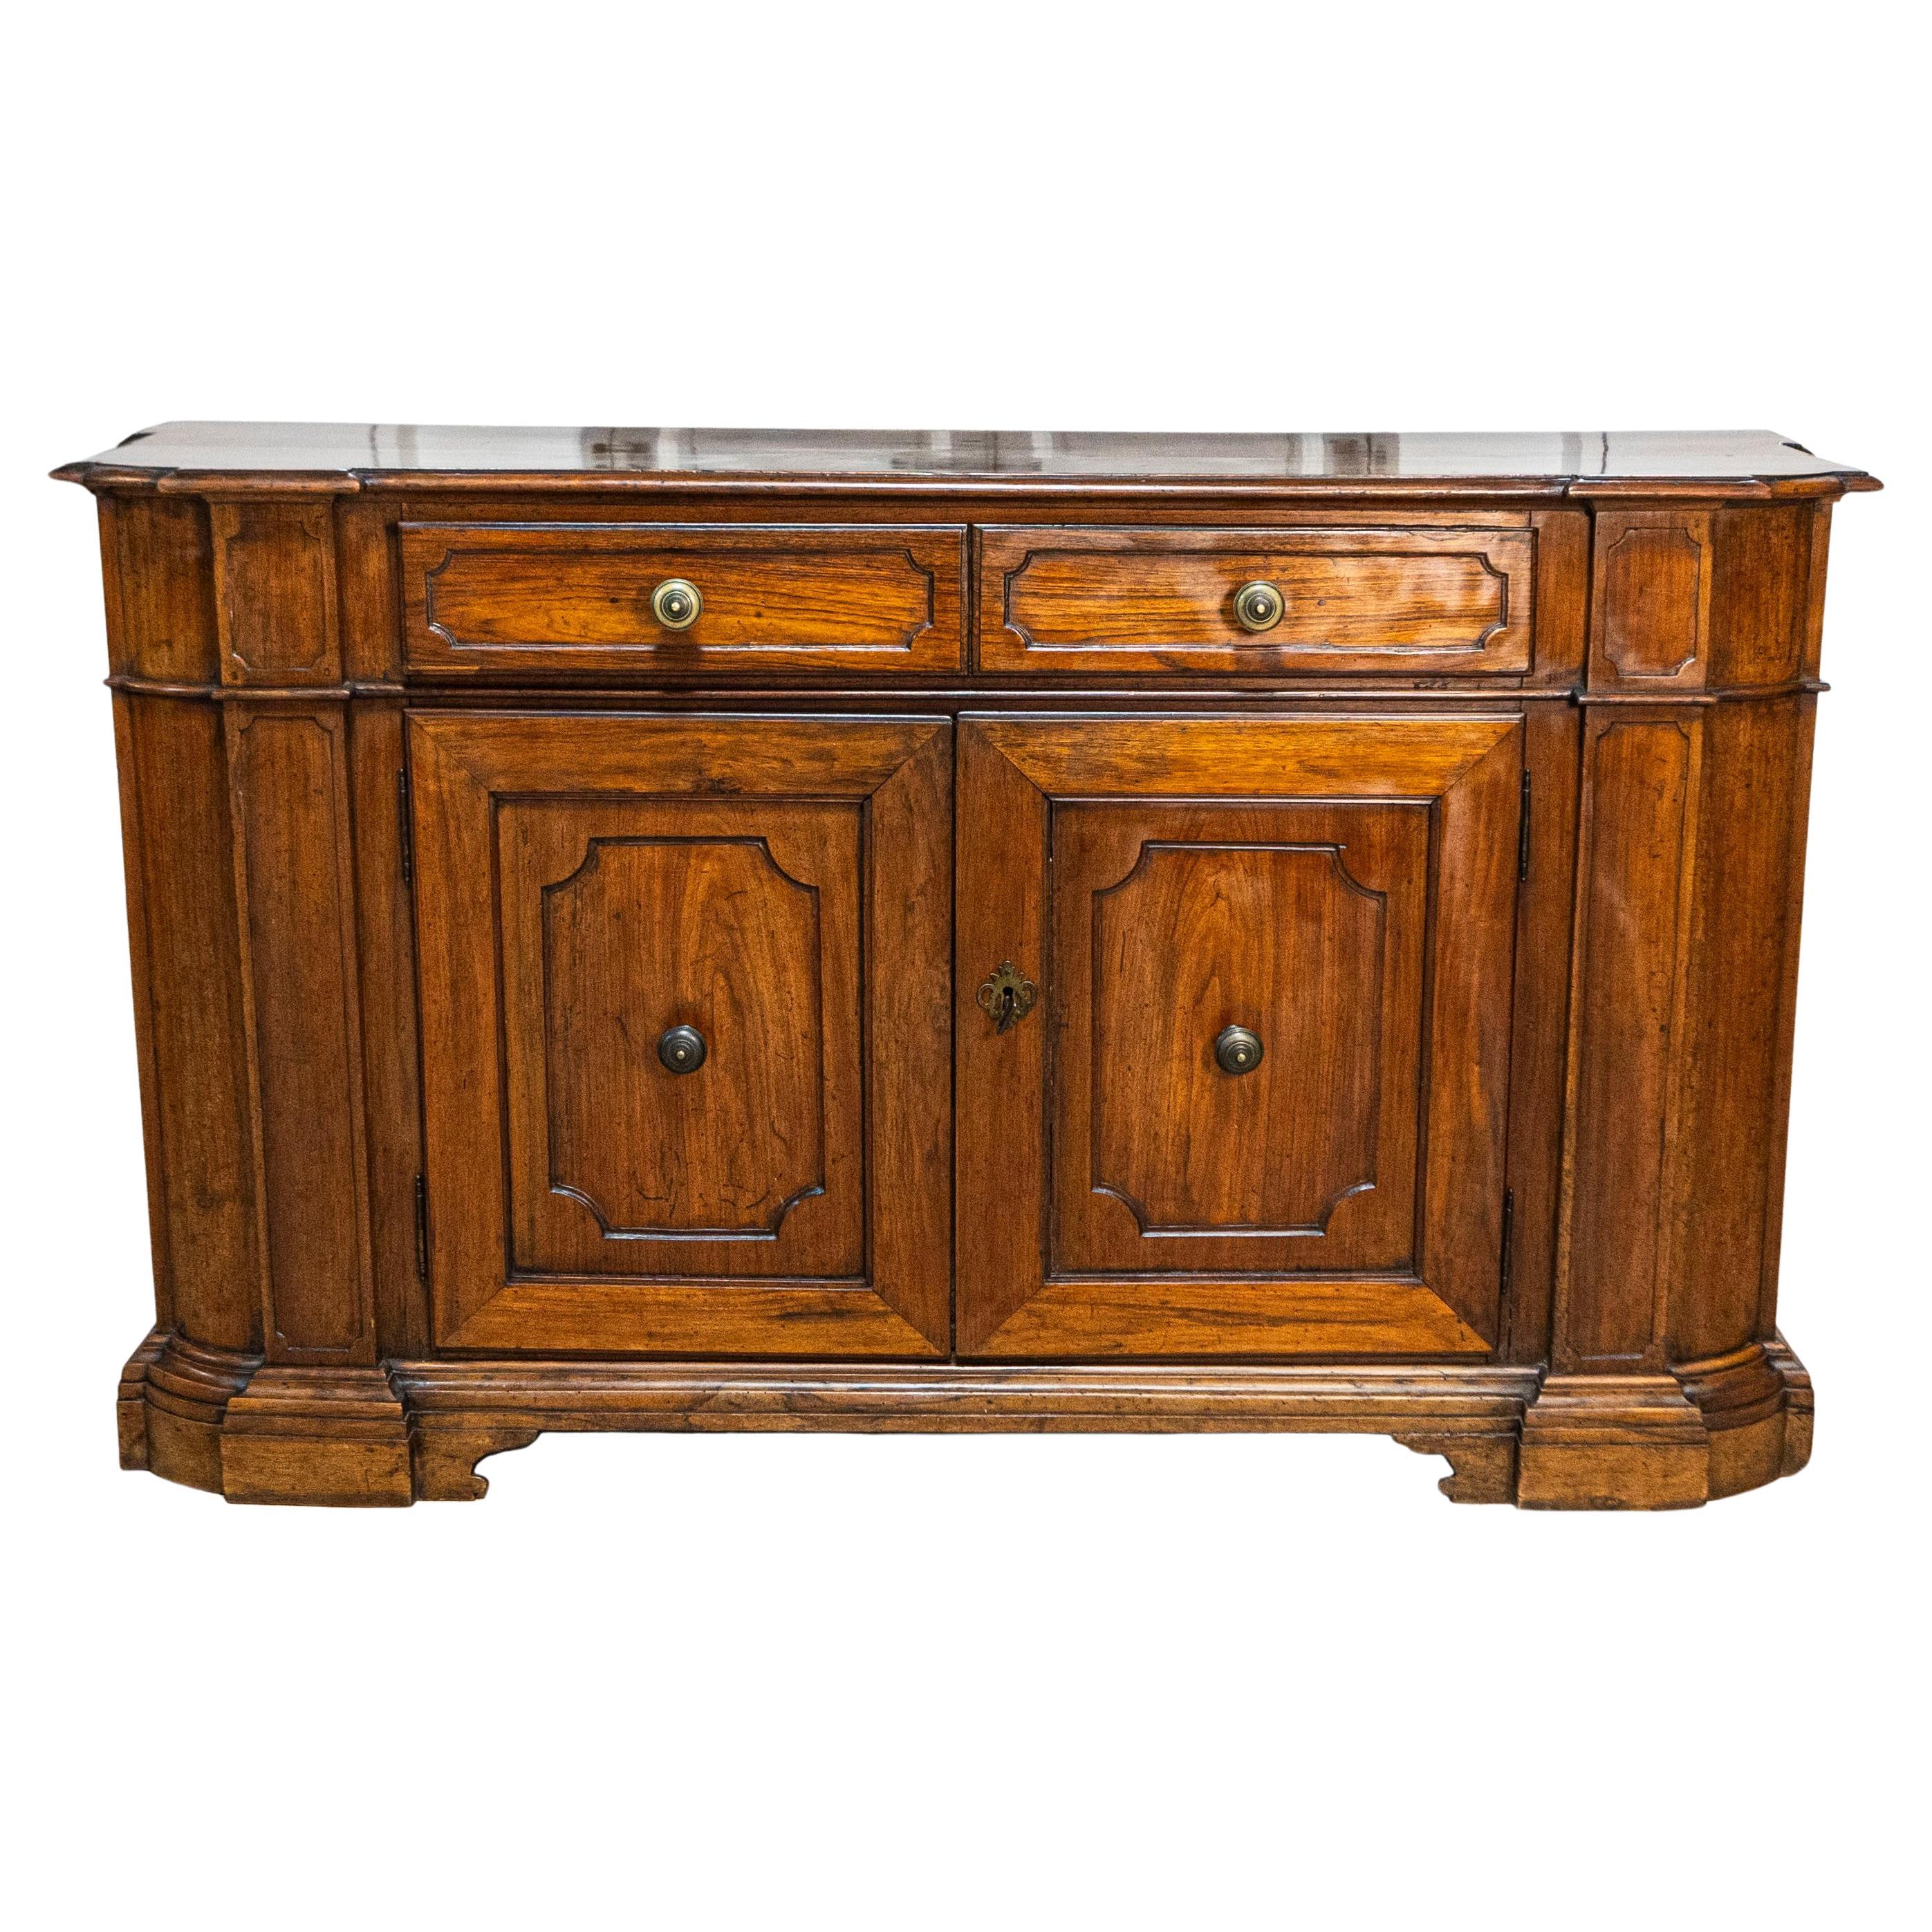 Italian 1700s Walnut Credenza with Four Drawers, Four Doors and Pilasters For Sale